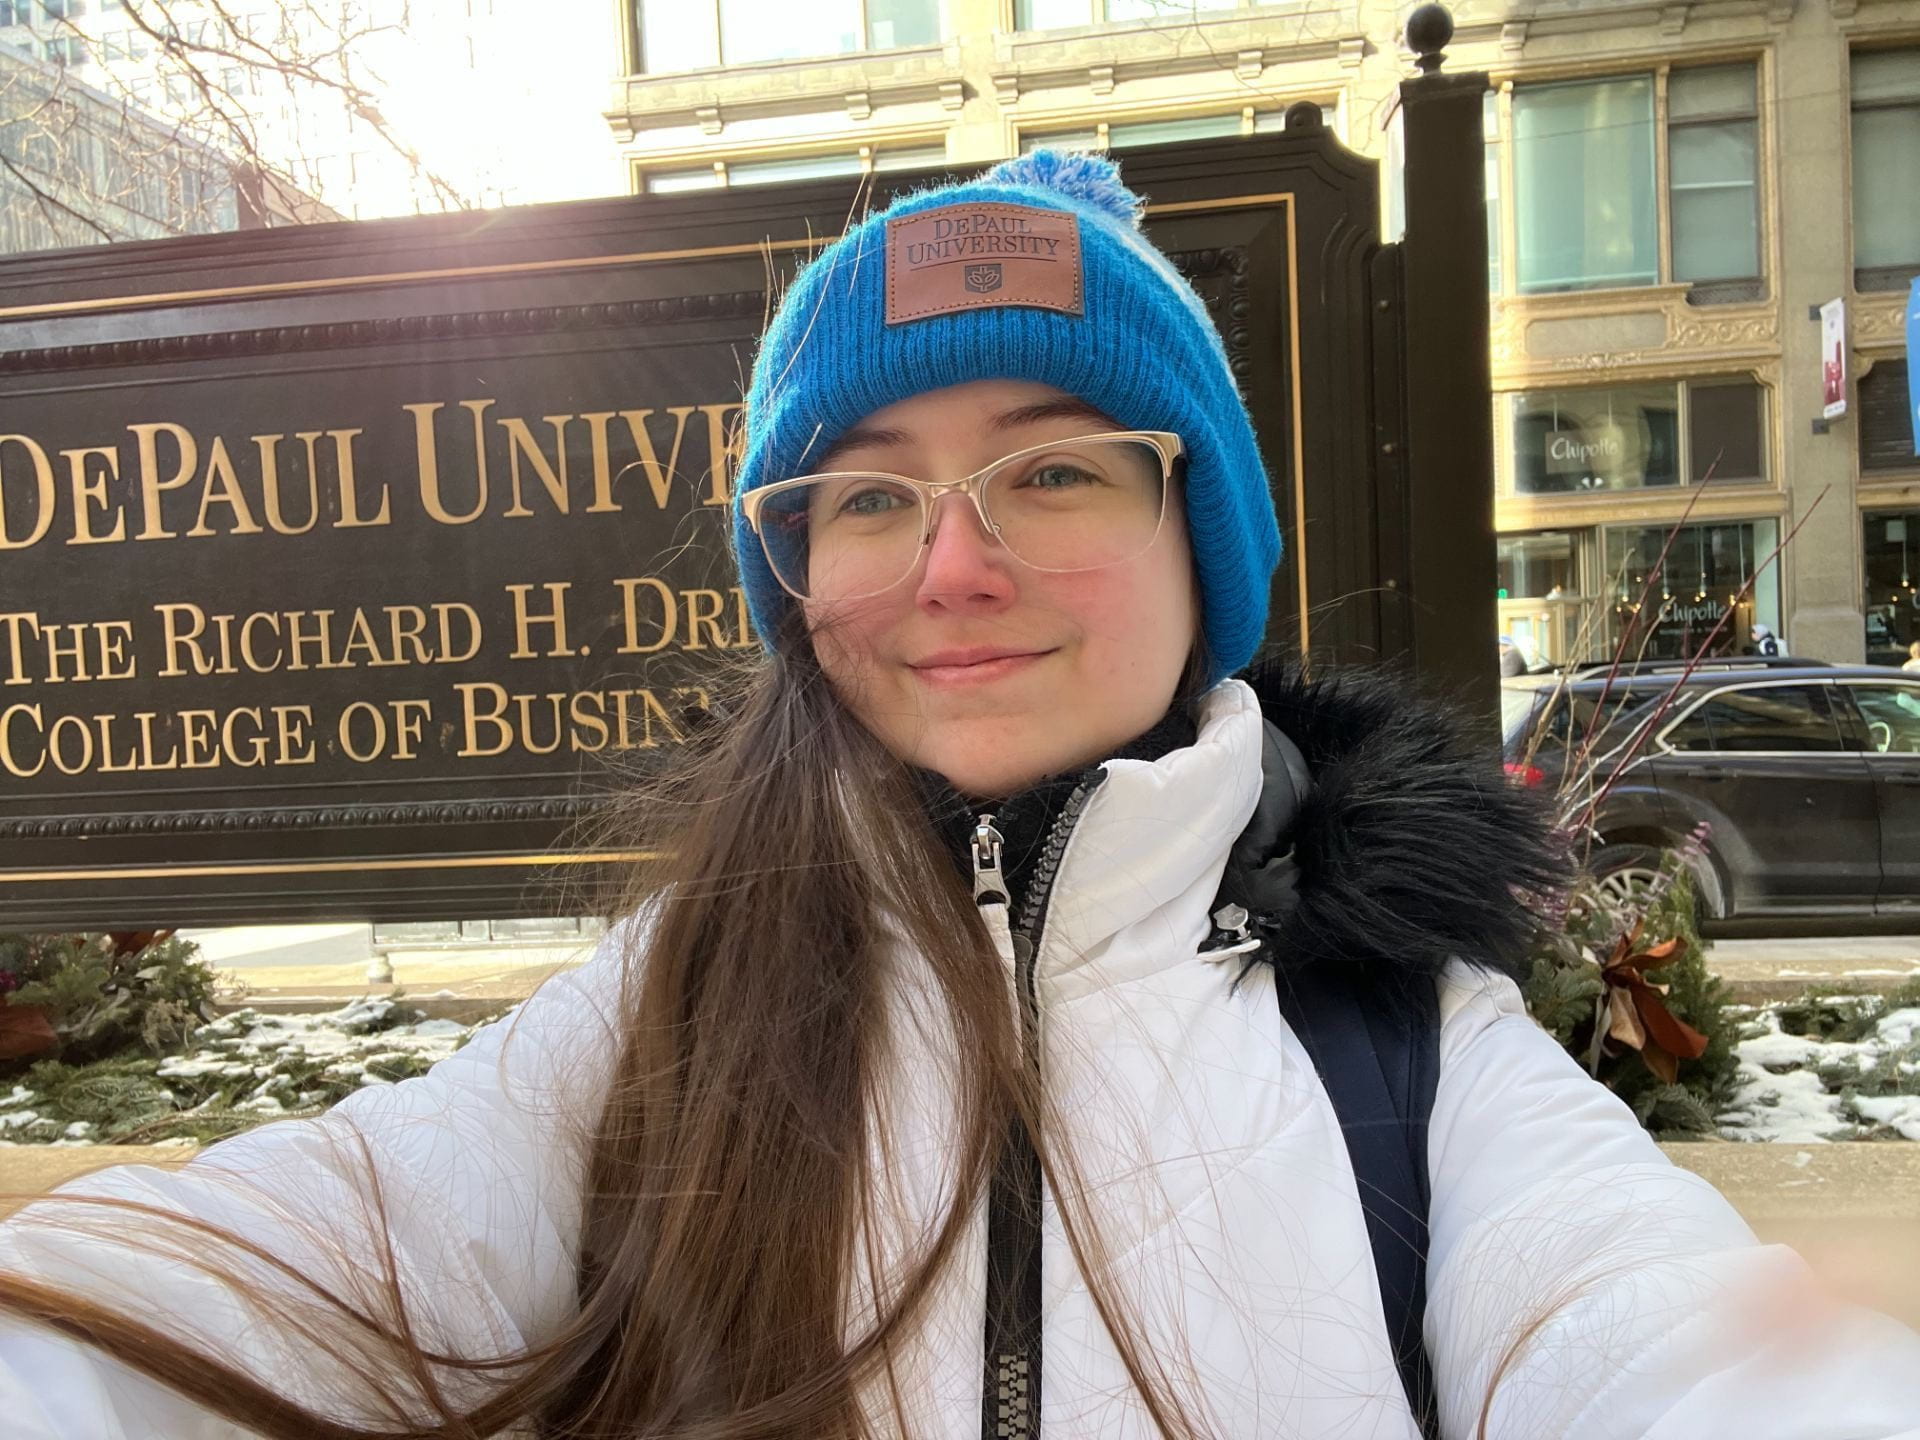 Sienna standing in front of the DePaul University, Driehaus College of Business sign, with a DePaul Blue Beanie on.